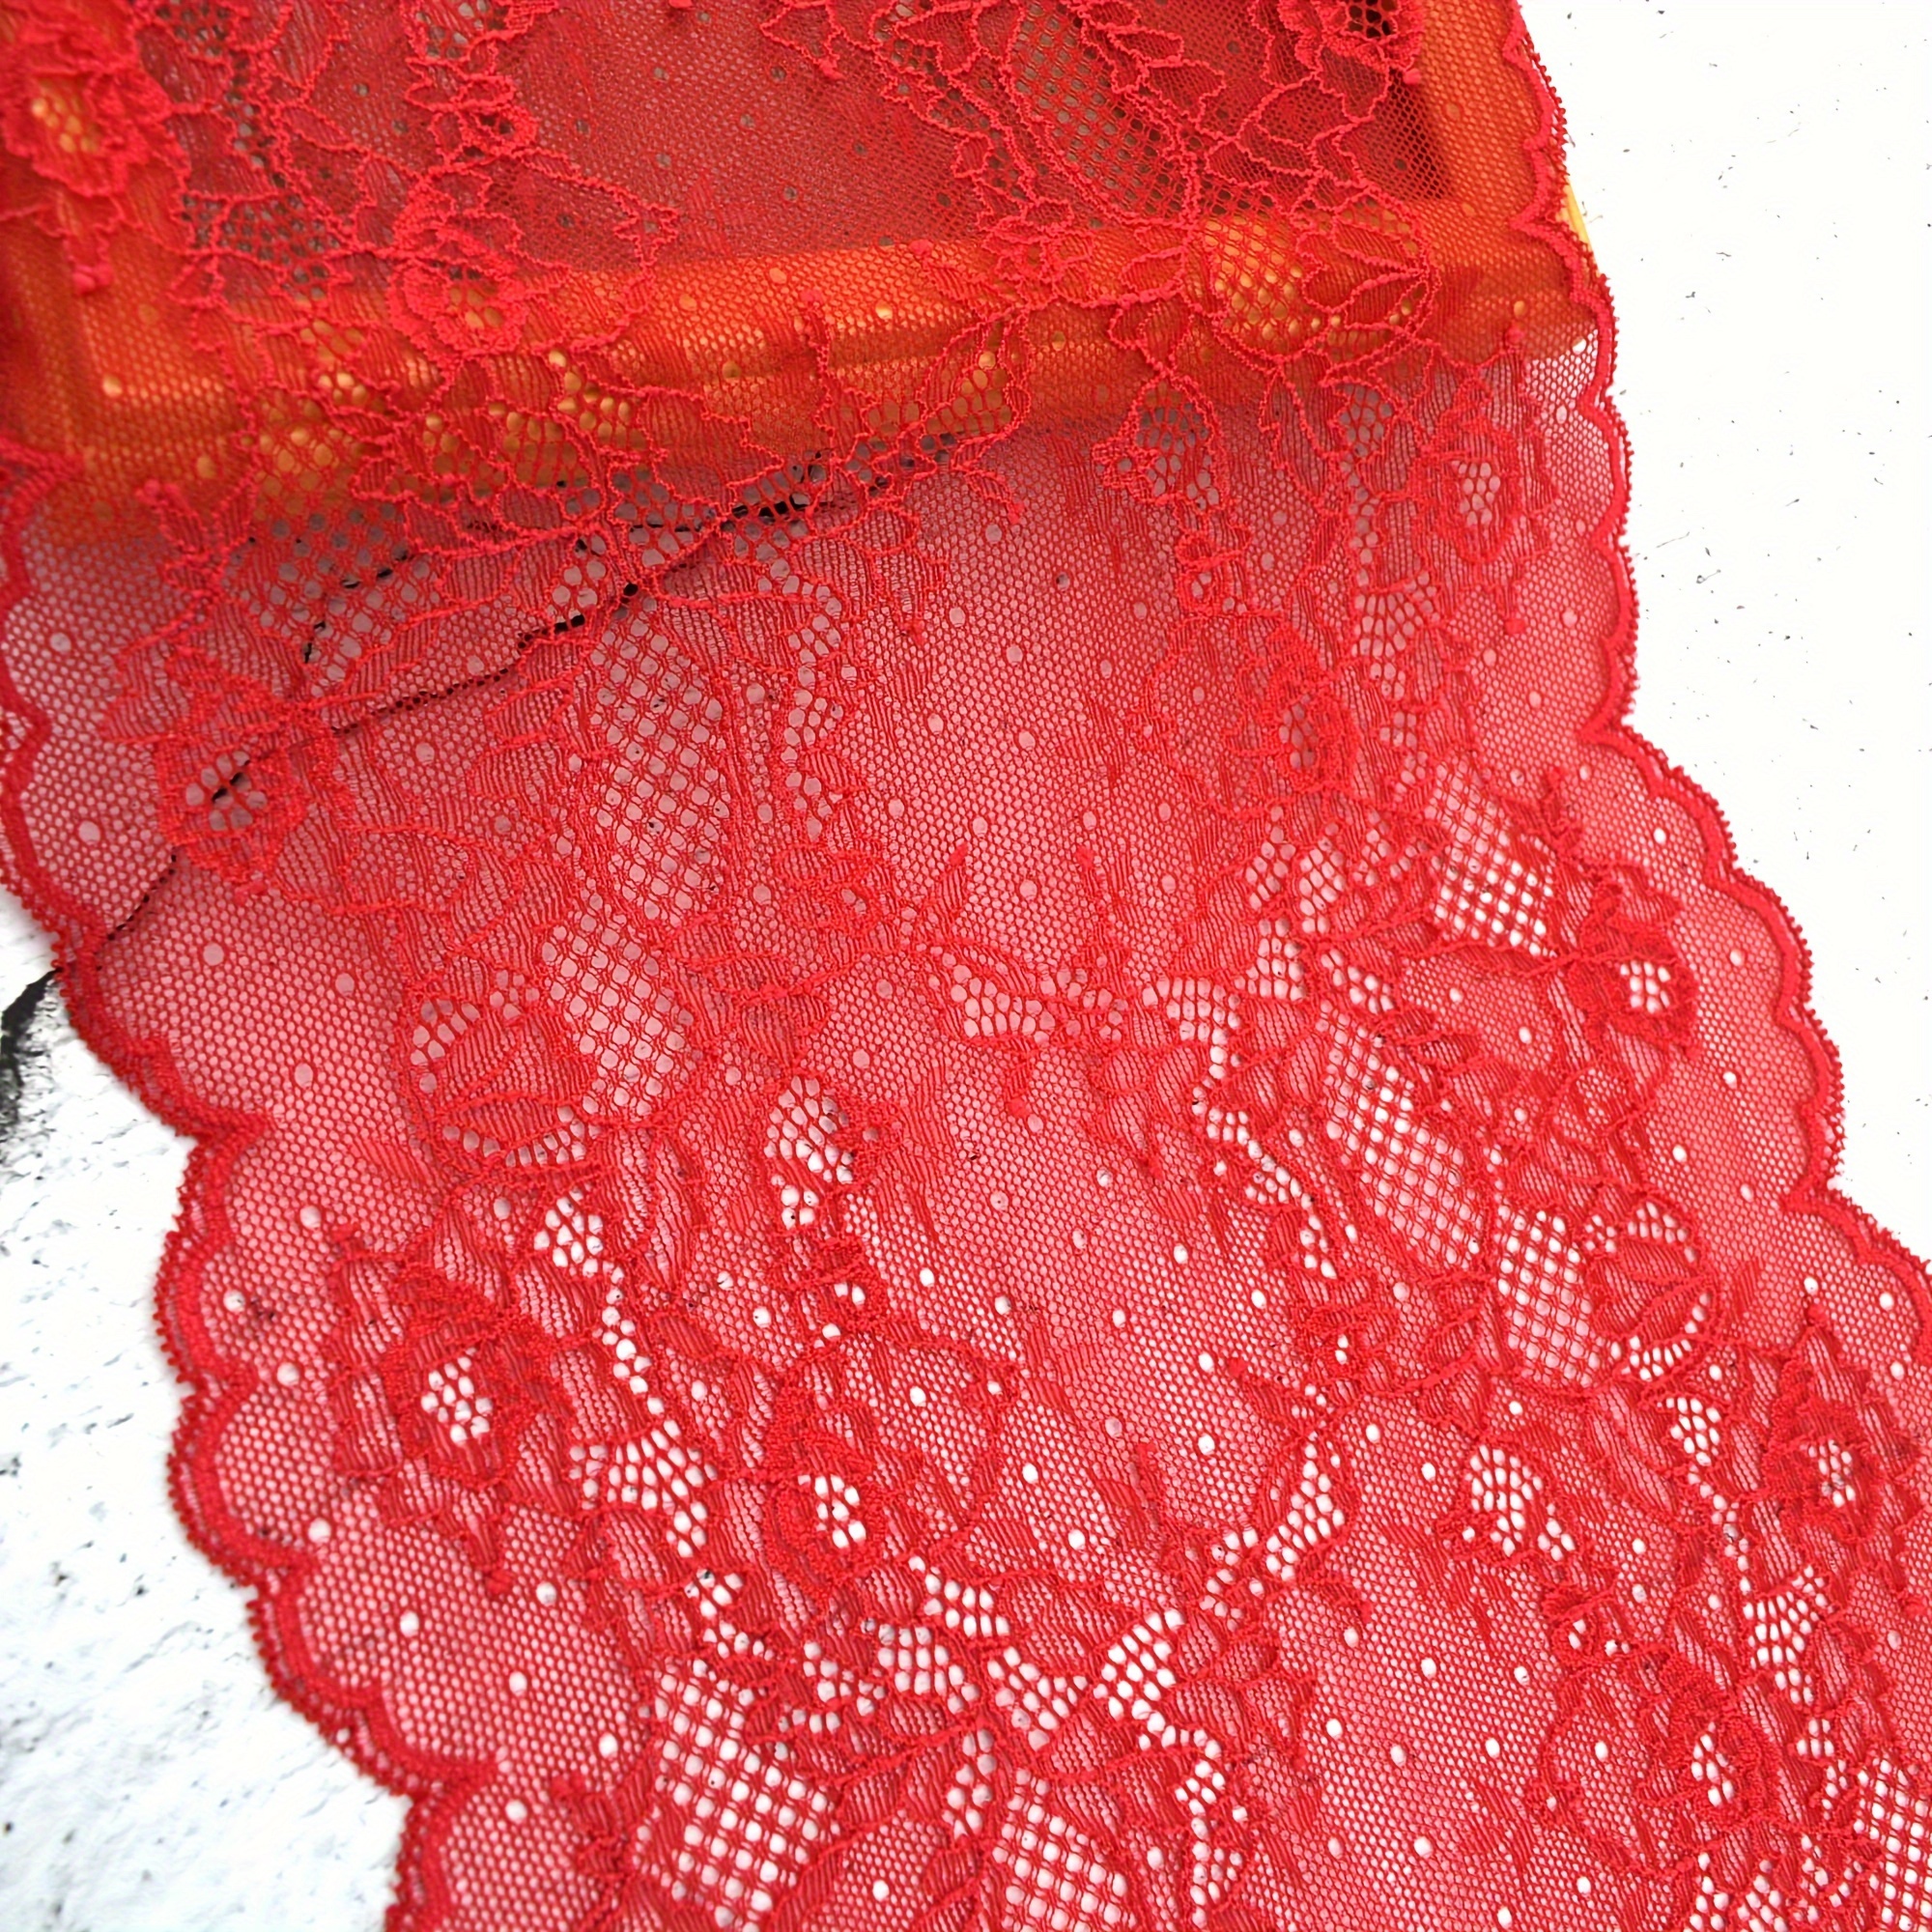  20 Yards Sheer Lace Trims, 11.8(30cm) Super Wide Embroidered  Floral Trimming, Mesh Fabric Lace for Dress Sewing